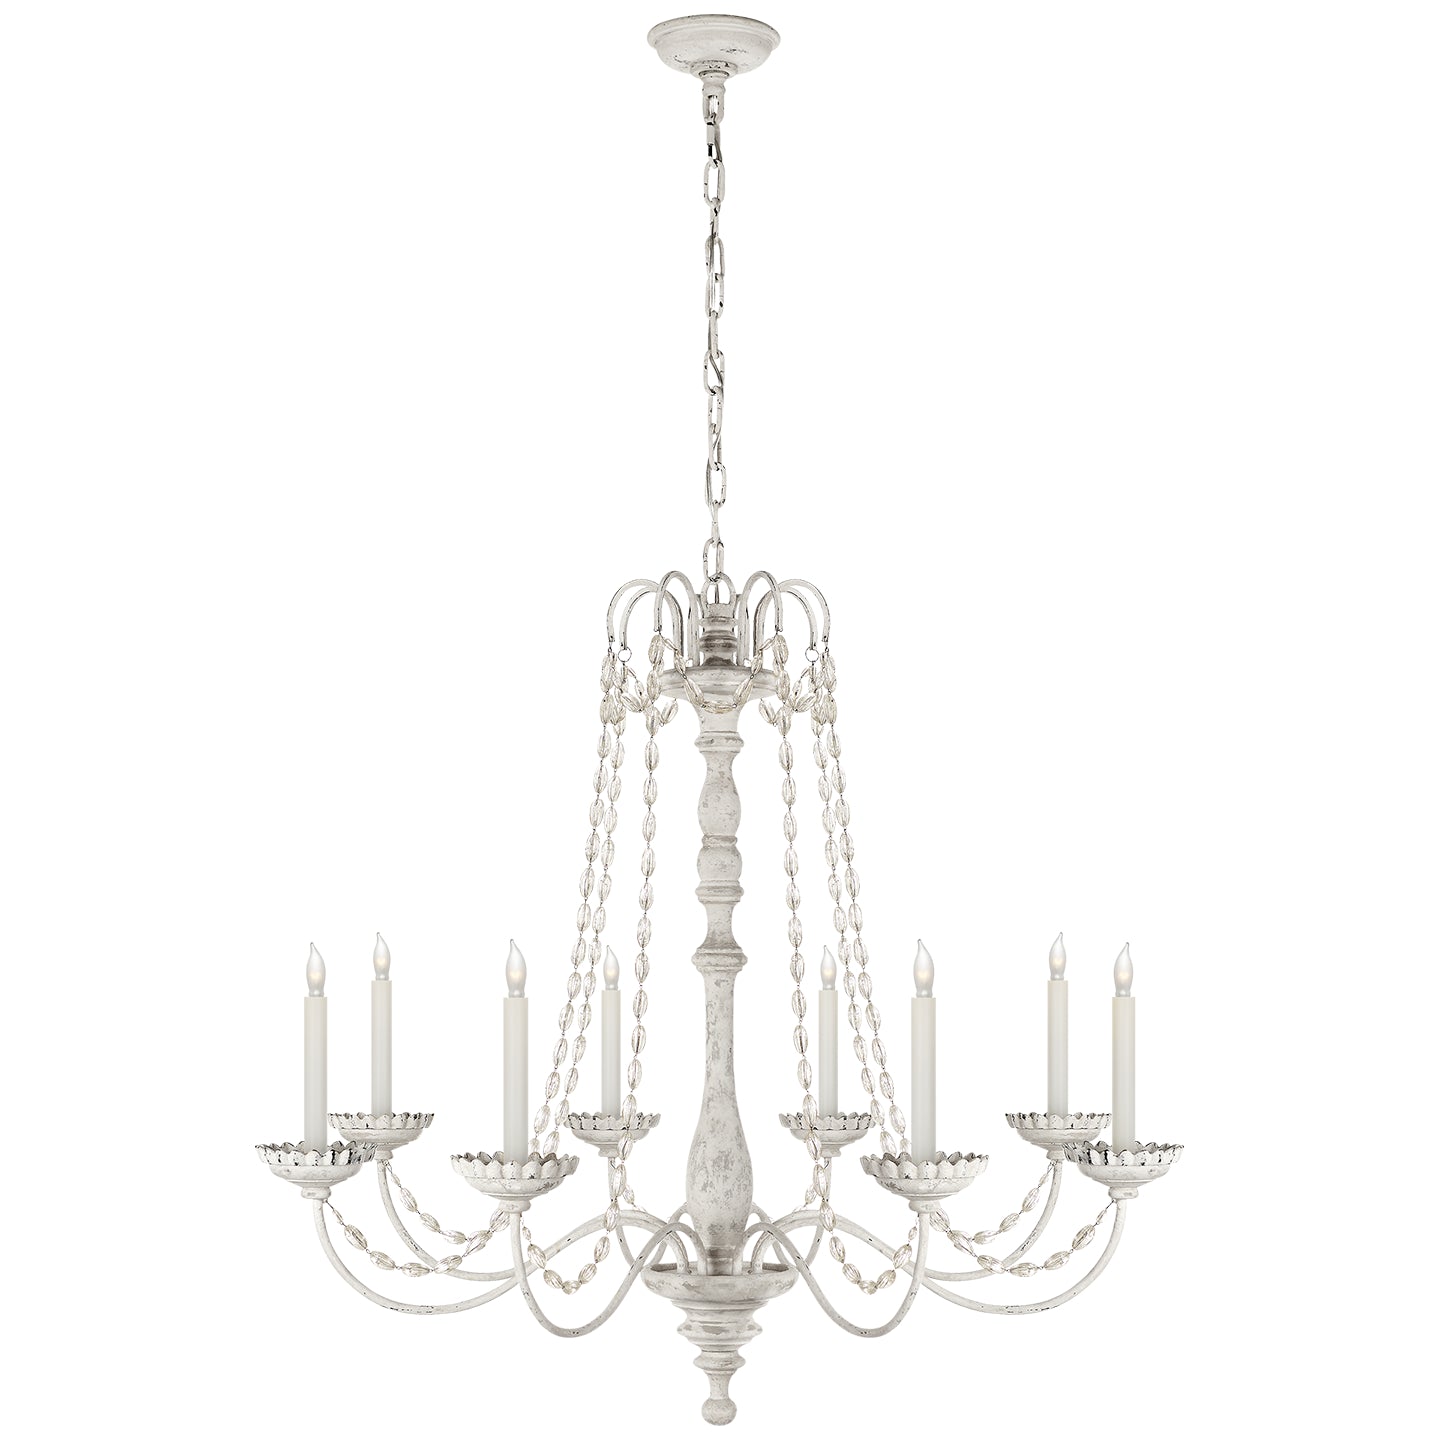 Load image into Gallery viewer, Visual Comfort Signature - CHC 1548BW-SG - Eight Light Chandelier - Flanders - Belgian White
